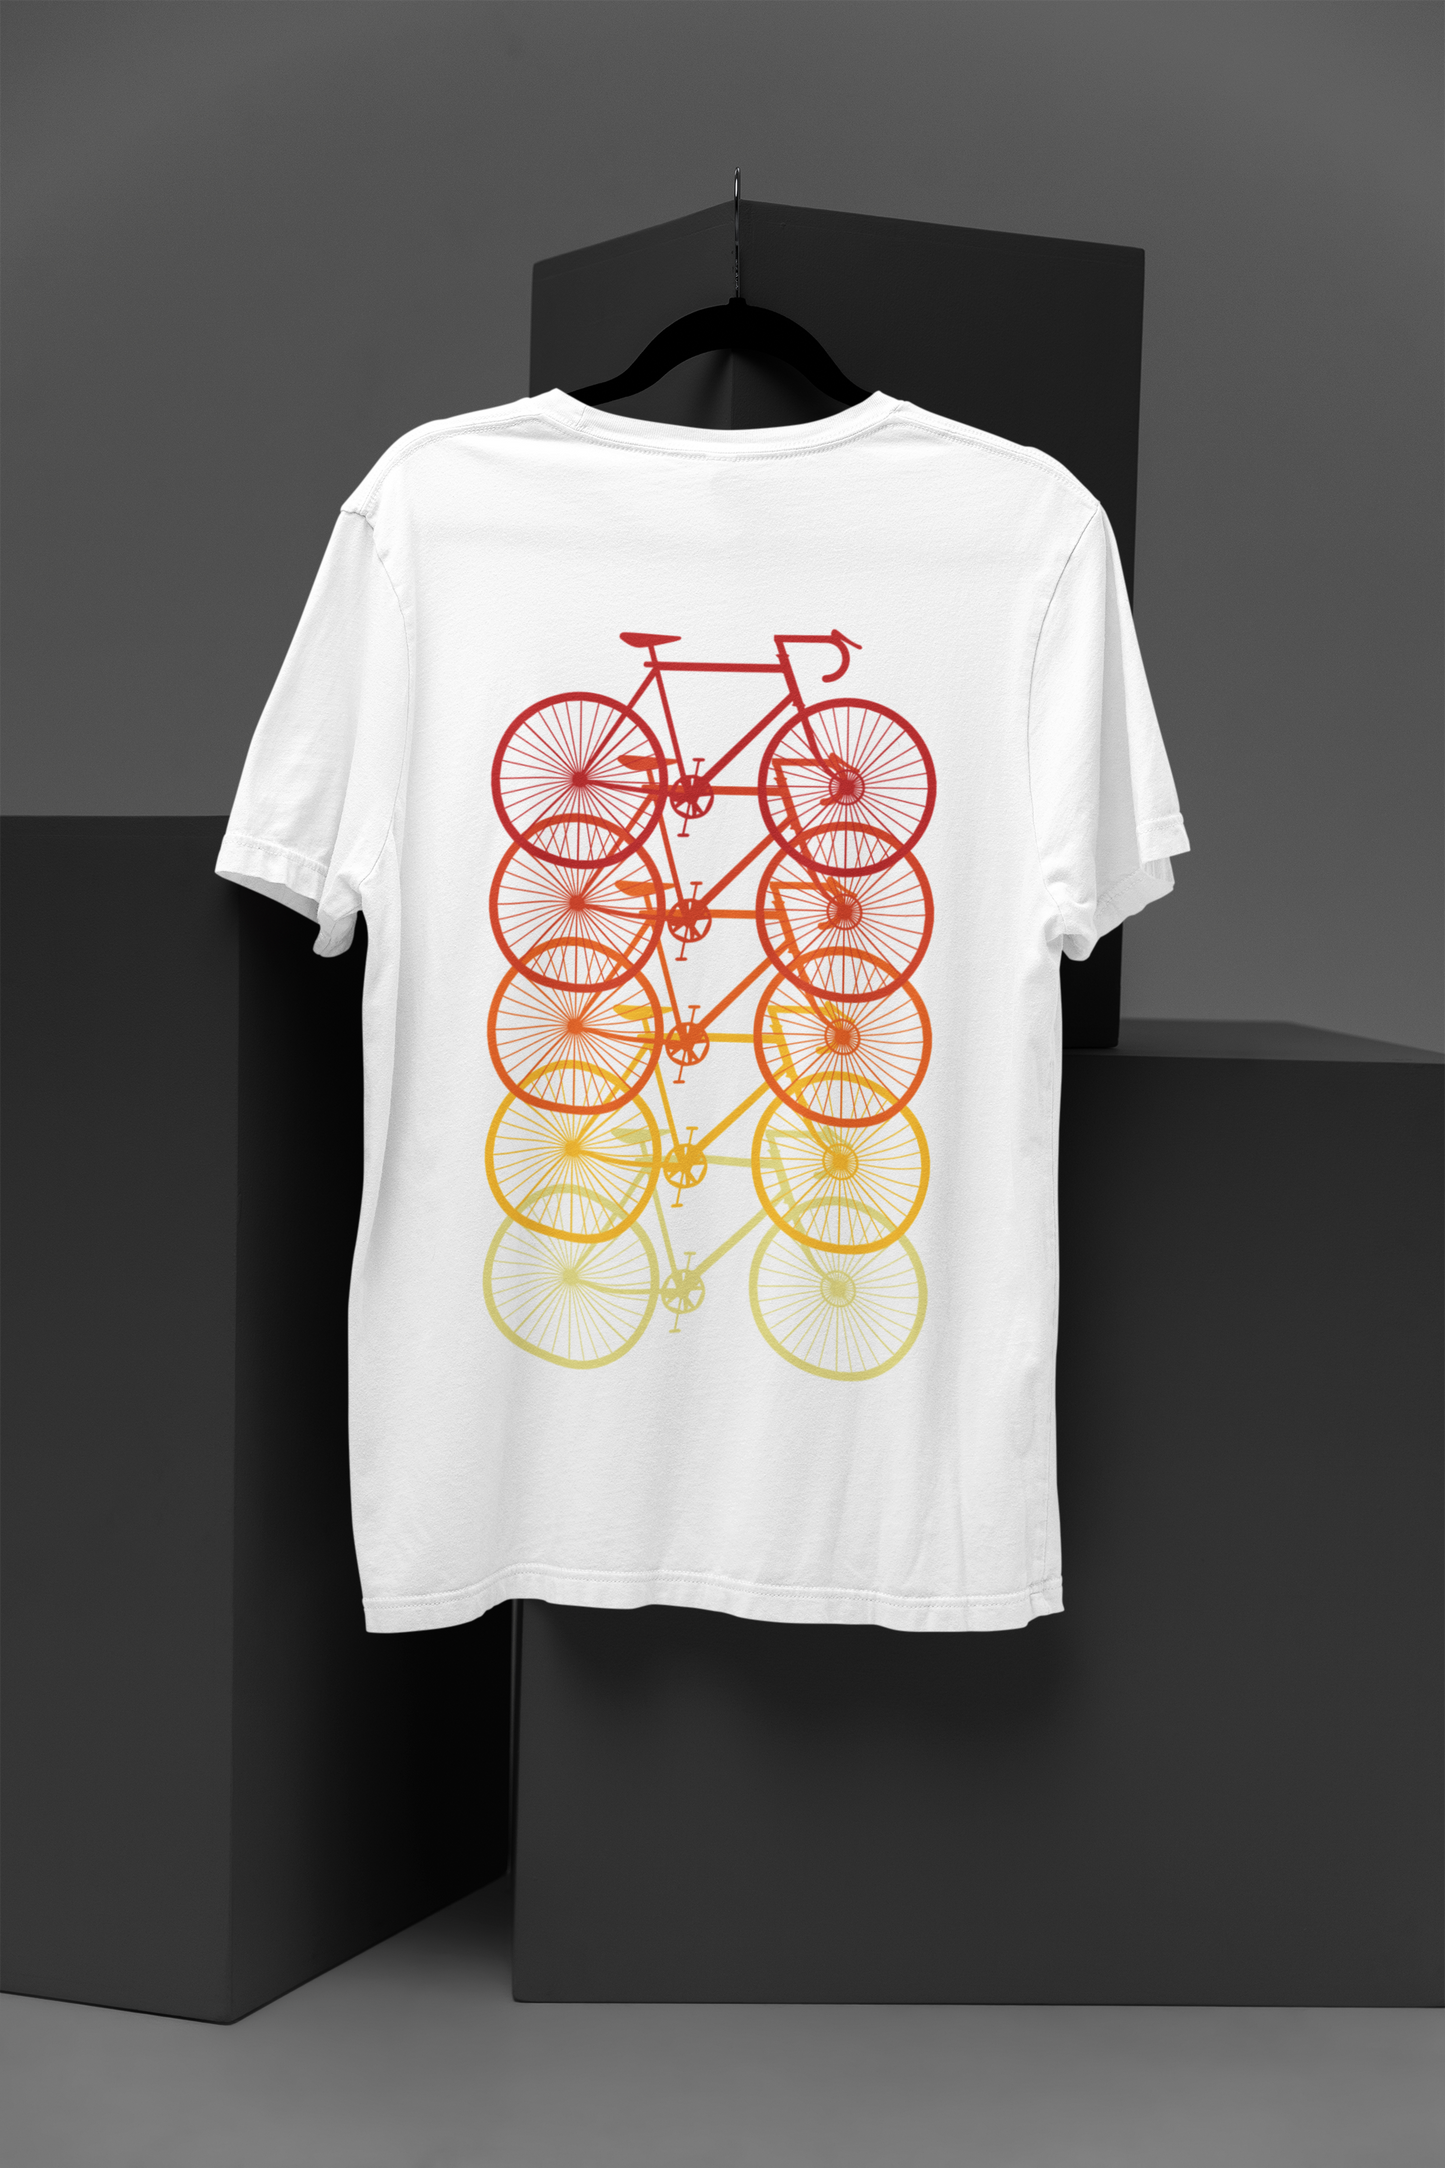 Ombre Cycling Graphic - Red to Yellow Gradient T-Shirt